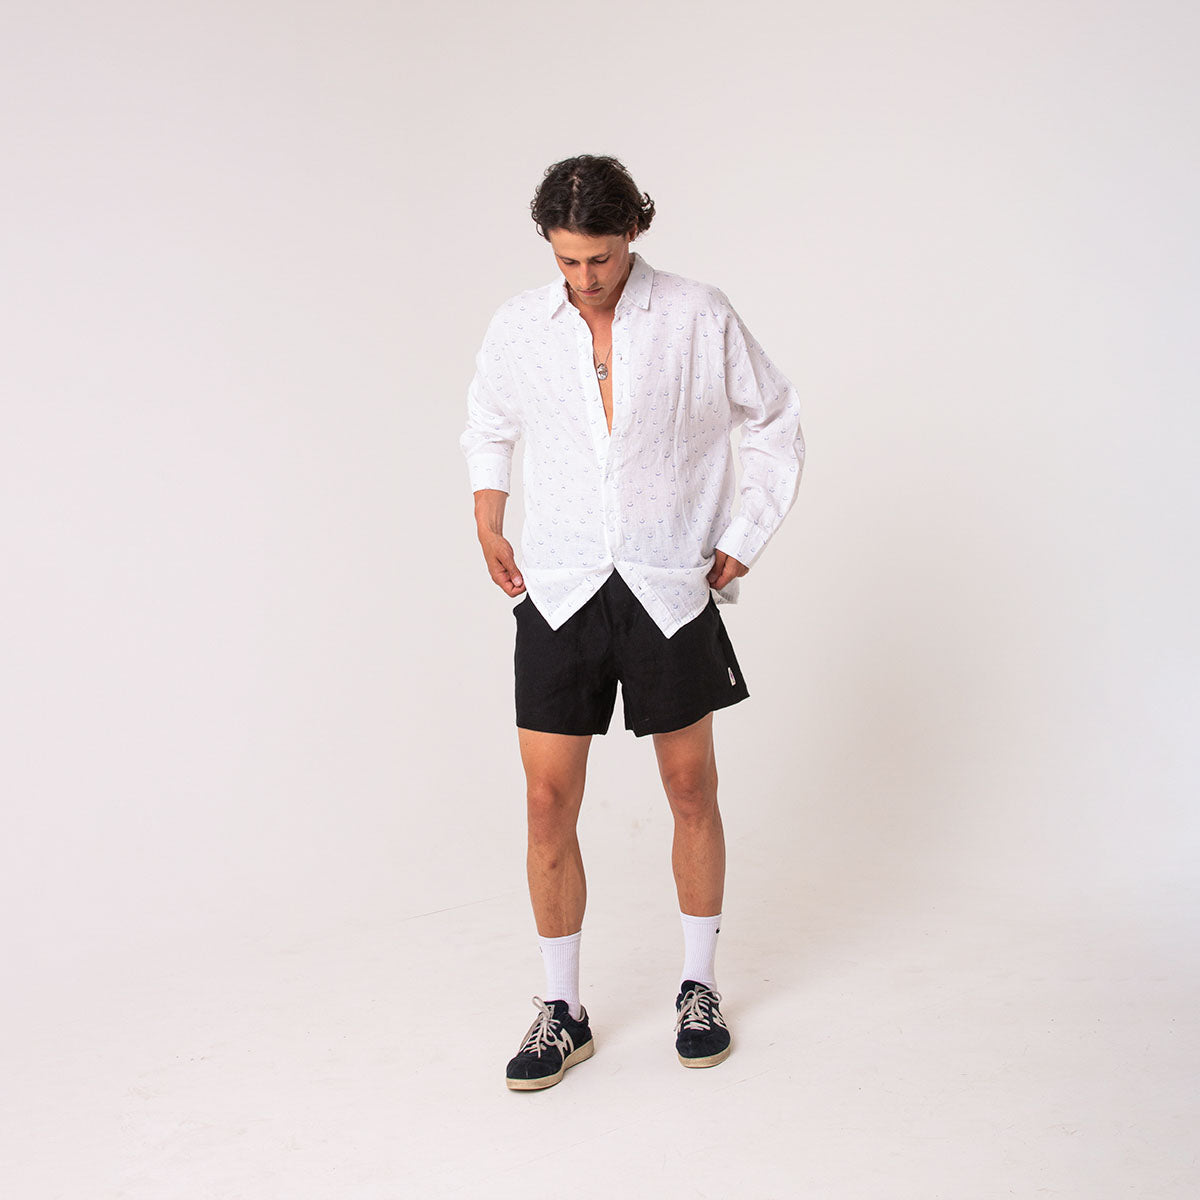 Linen shirt and shorts for men | Not always happy